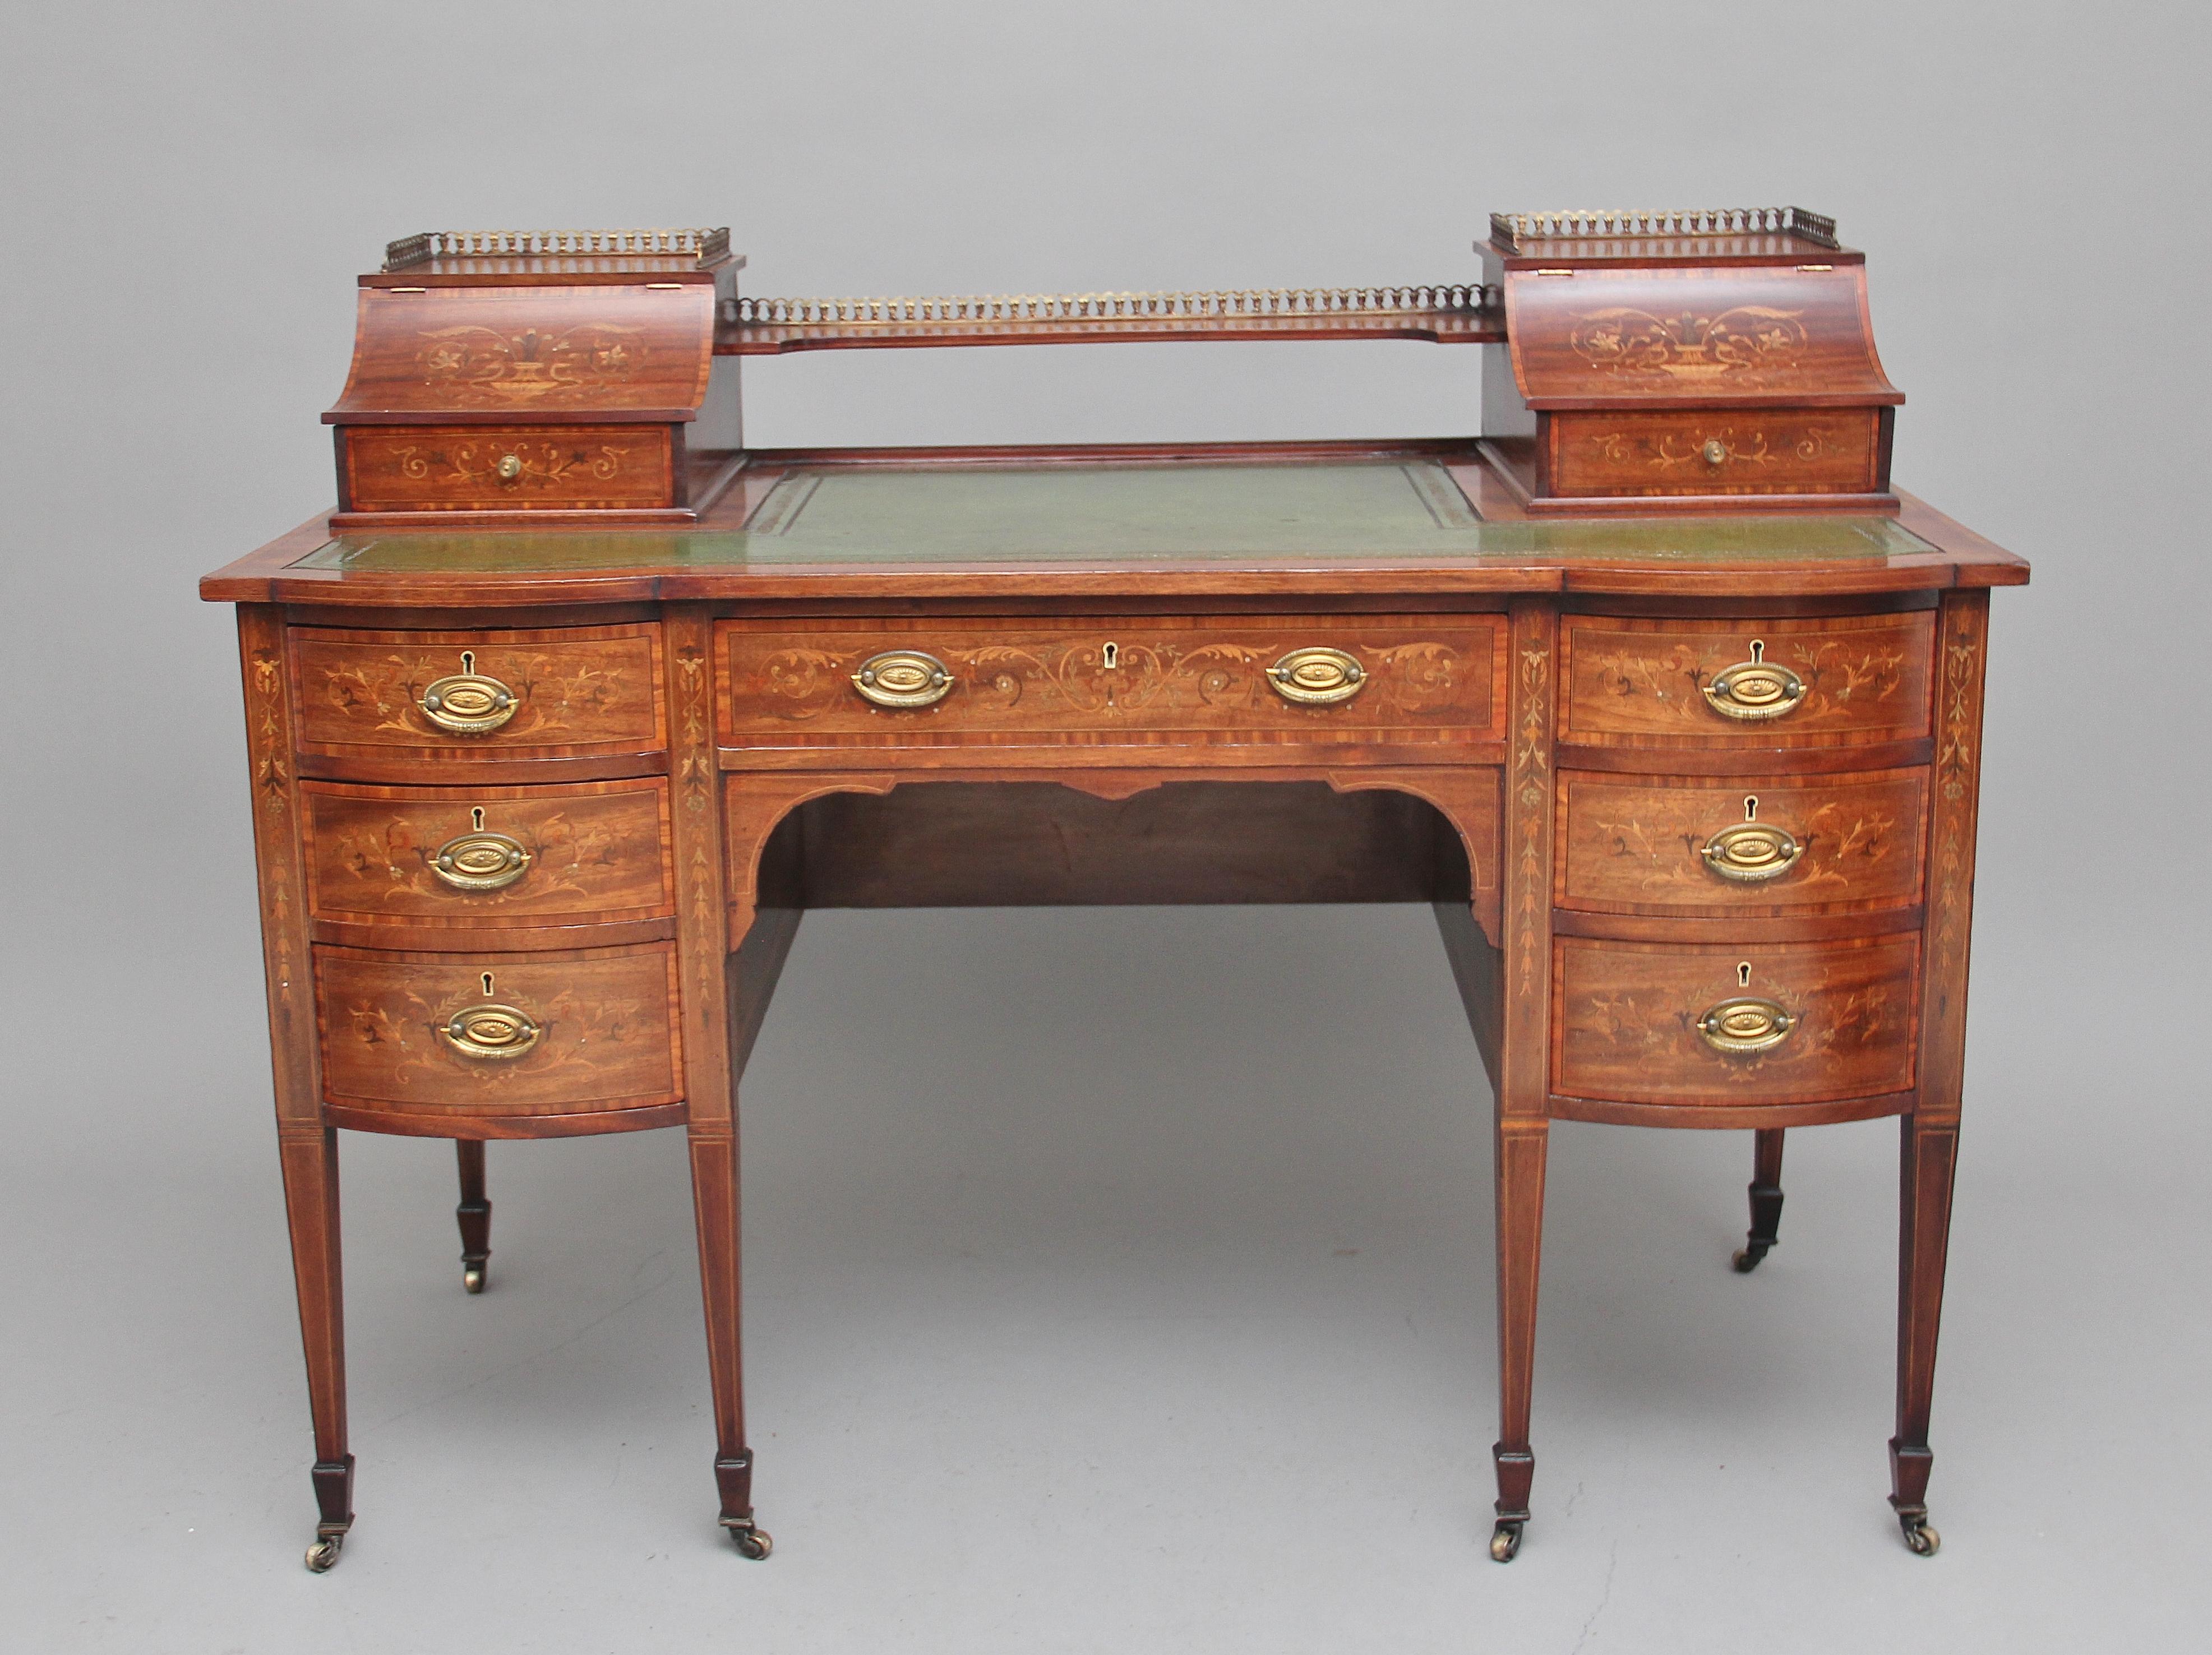 19th century inlaid mahogany desk with satinwood crossbanding, the top having a shelf flanked either side by concave hinged stationary compartments beautifully inlaid with scrolling flowers and urns, each with a drawer with fitted compartments, the